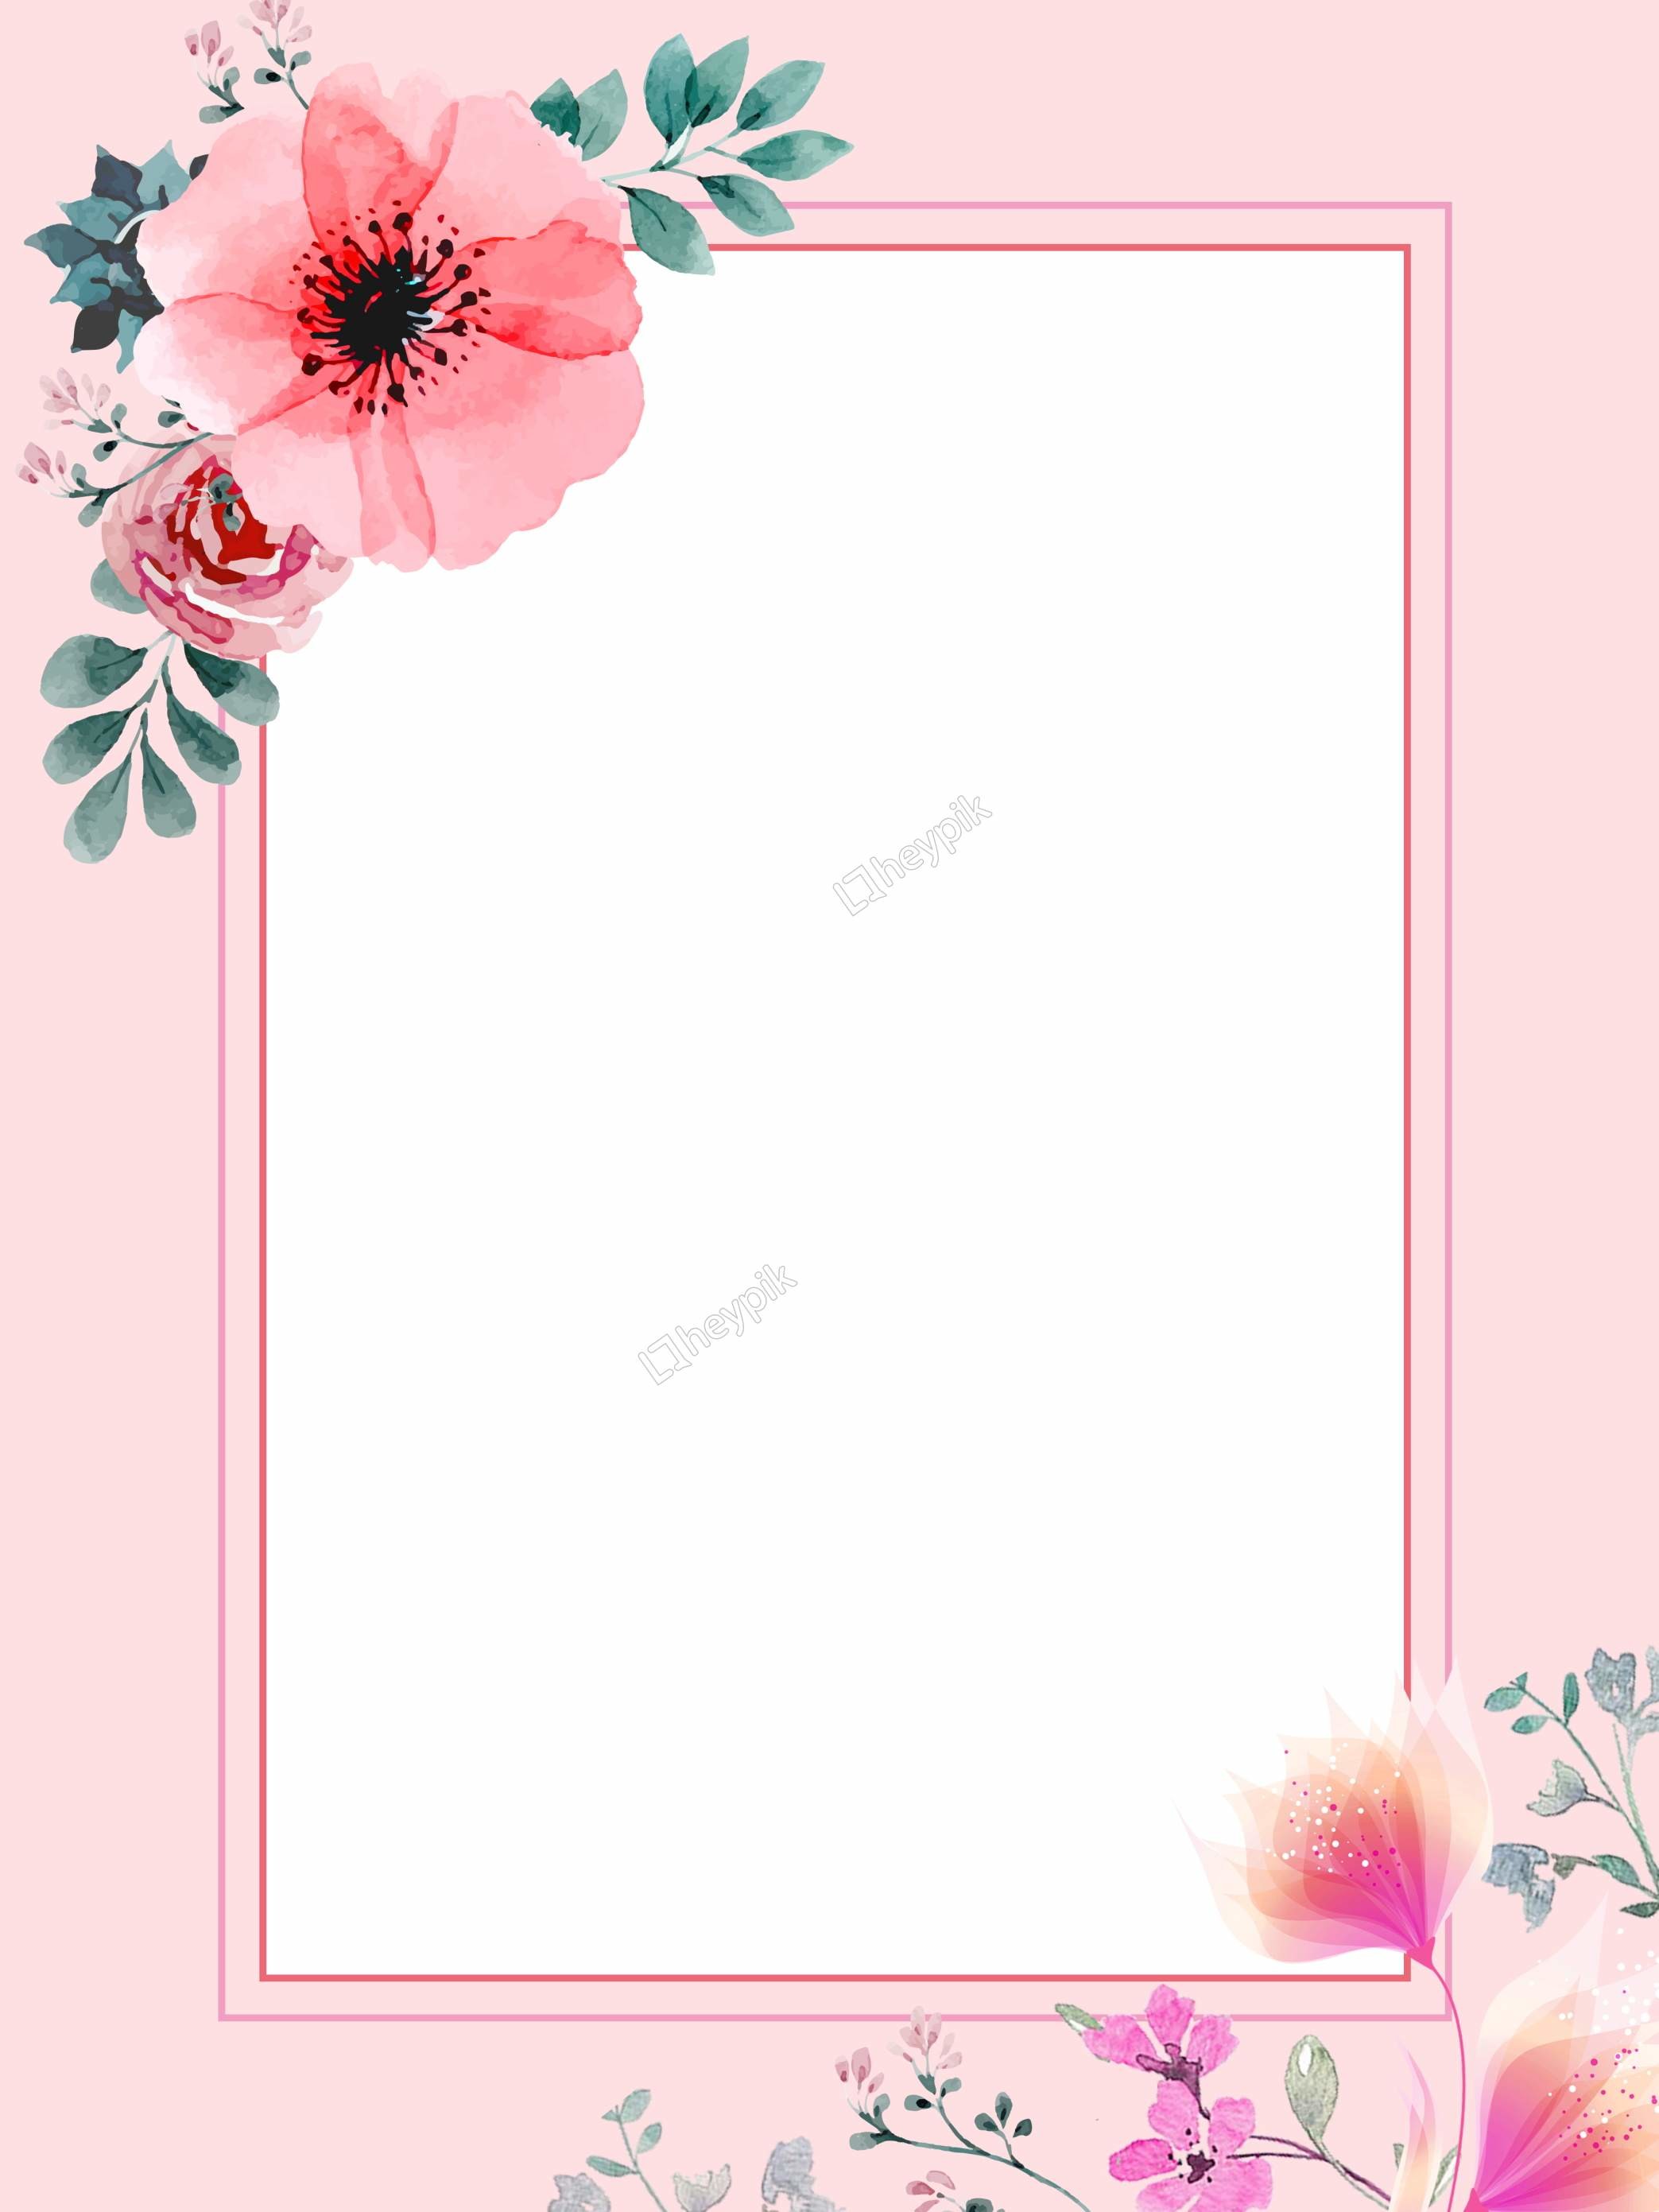 2087x2782 Hand painted flowers leaves pink warm background design